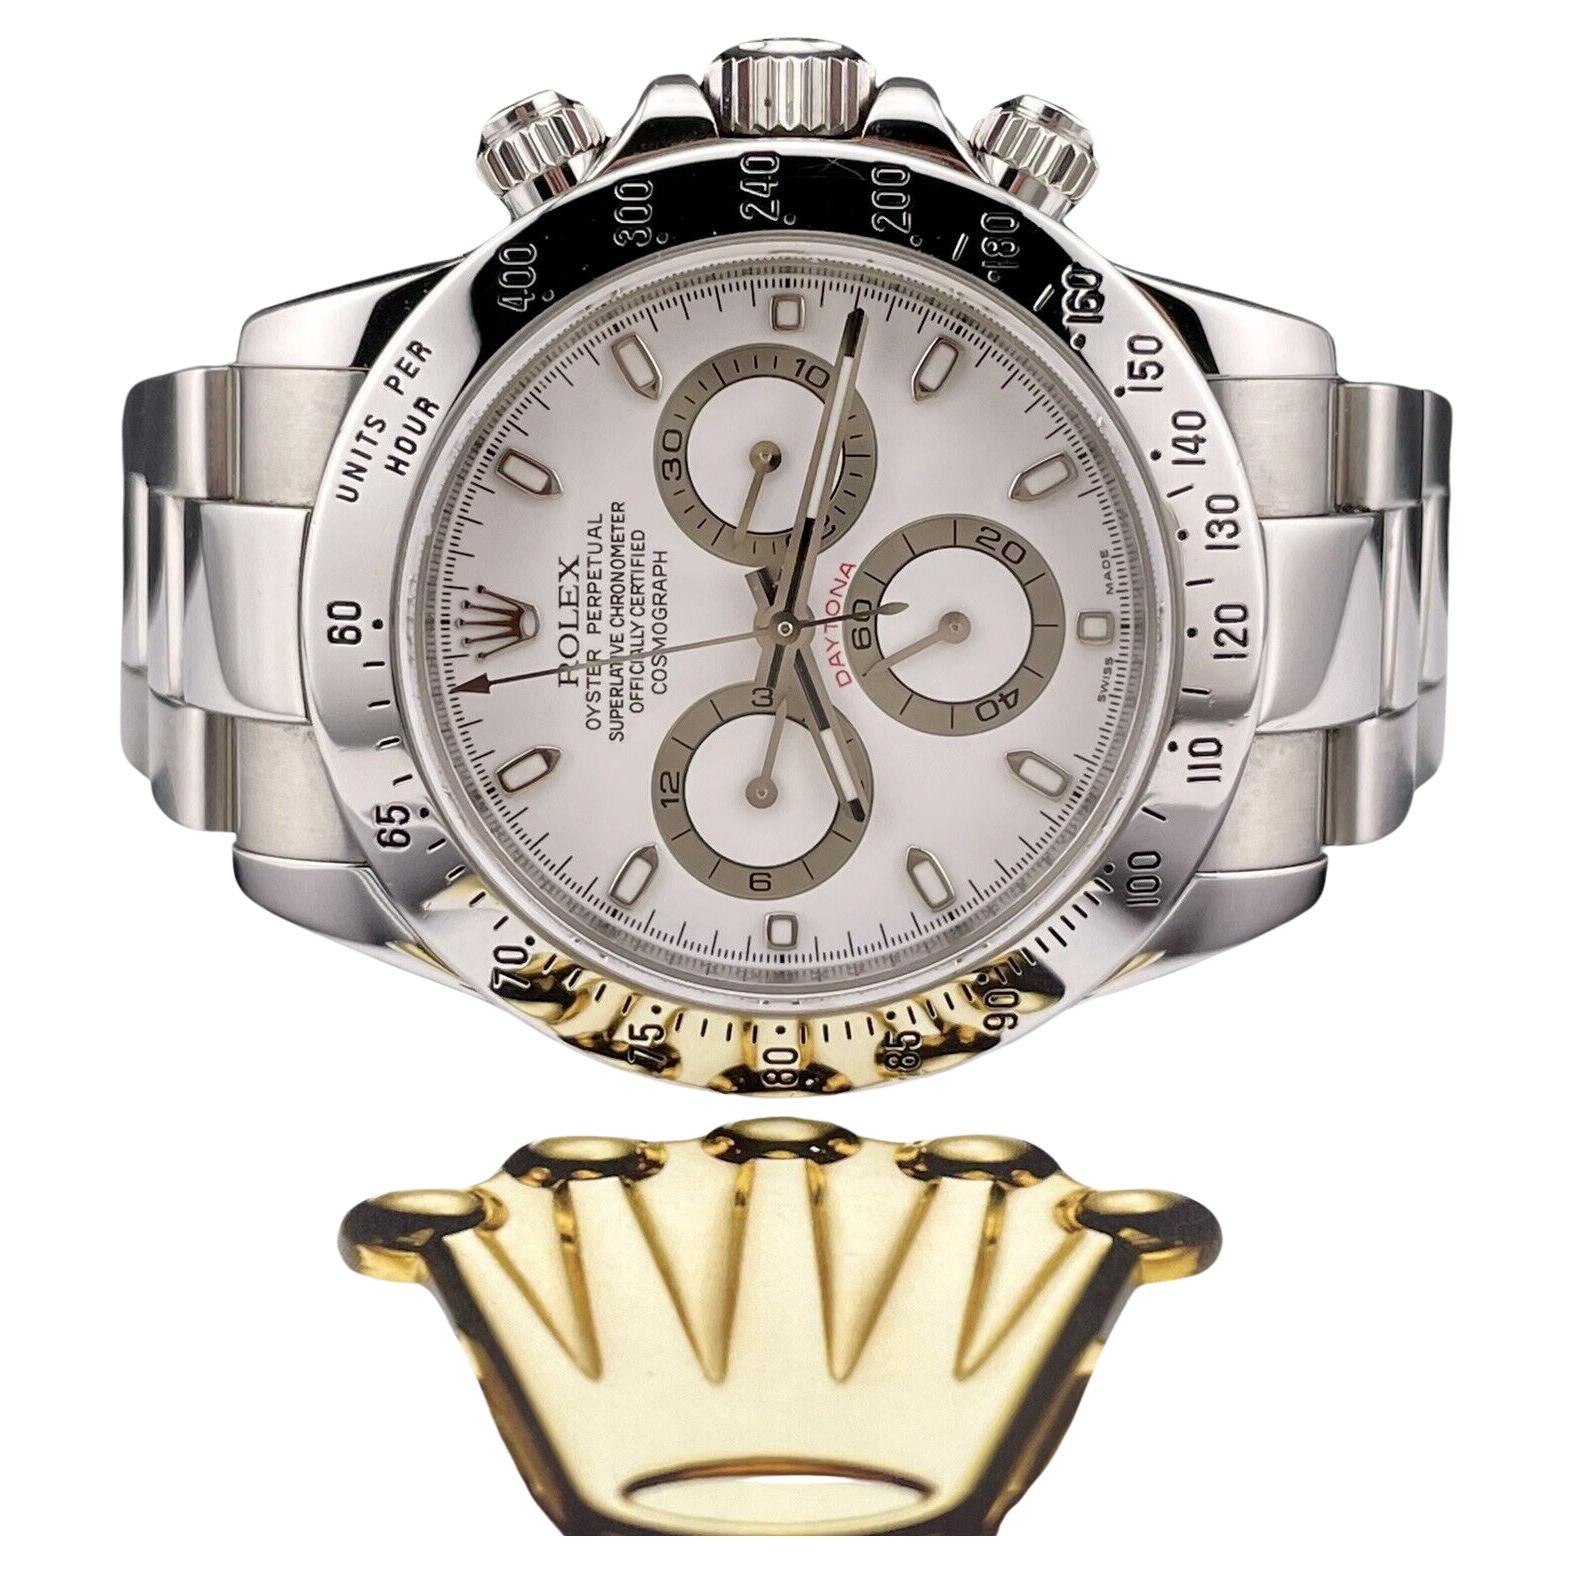 Rolex Daytona Cosmograph 40mm Men's Oyster White Dial Chrono Steel Watch 116520 For Sale